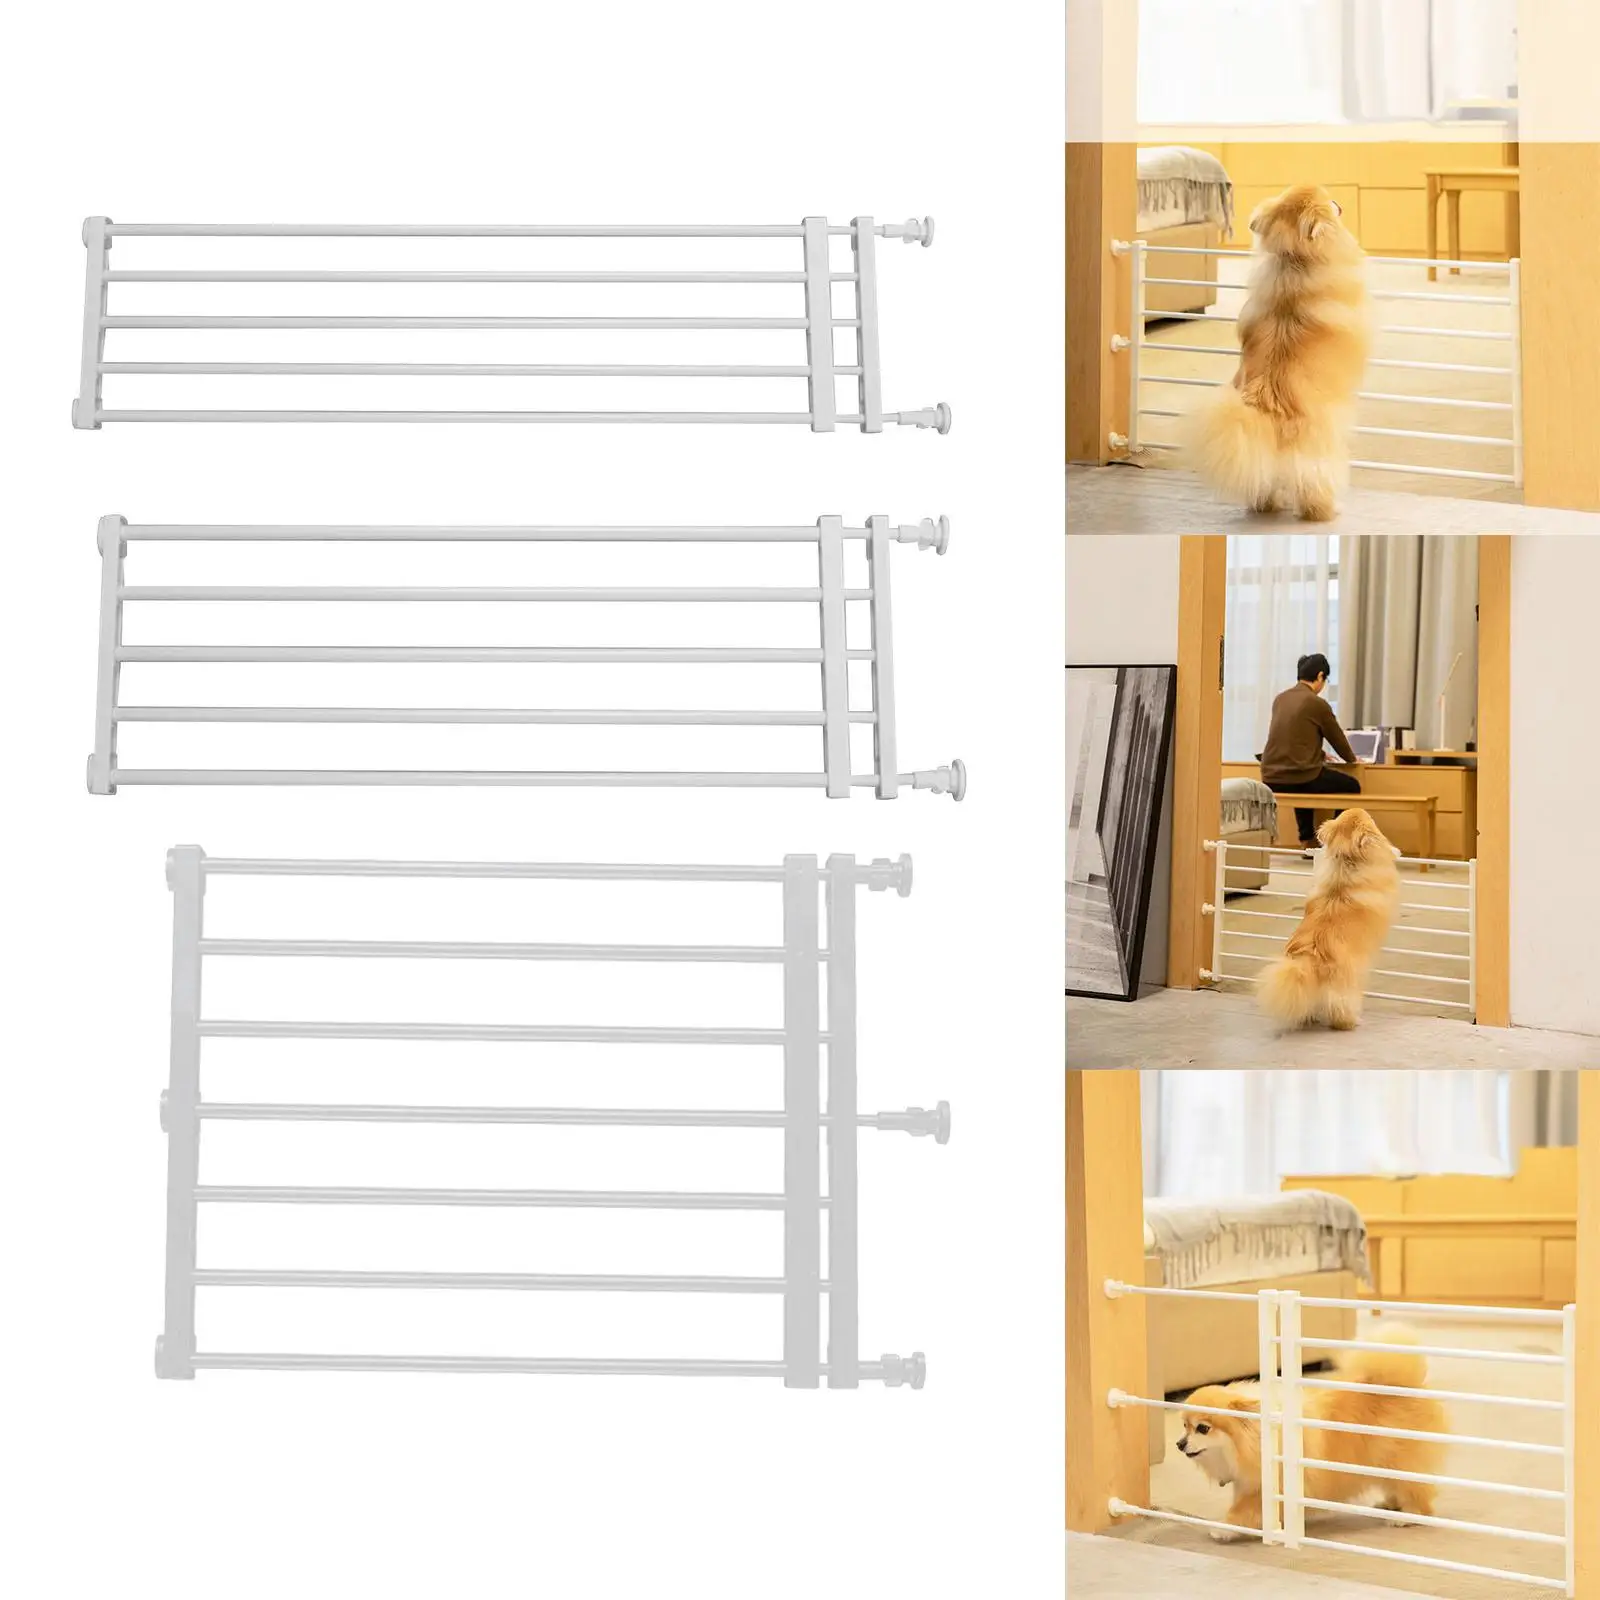 Portable Retractable Pet Dog Gate Screen Door Child Fence Baby Barrier Protection for Cat Small Medium Patio Indoor